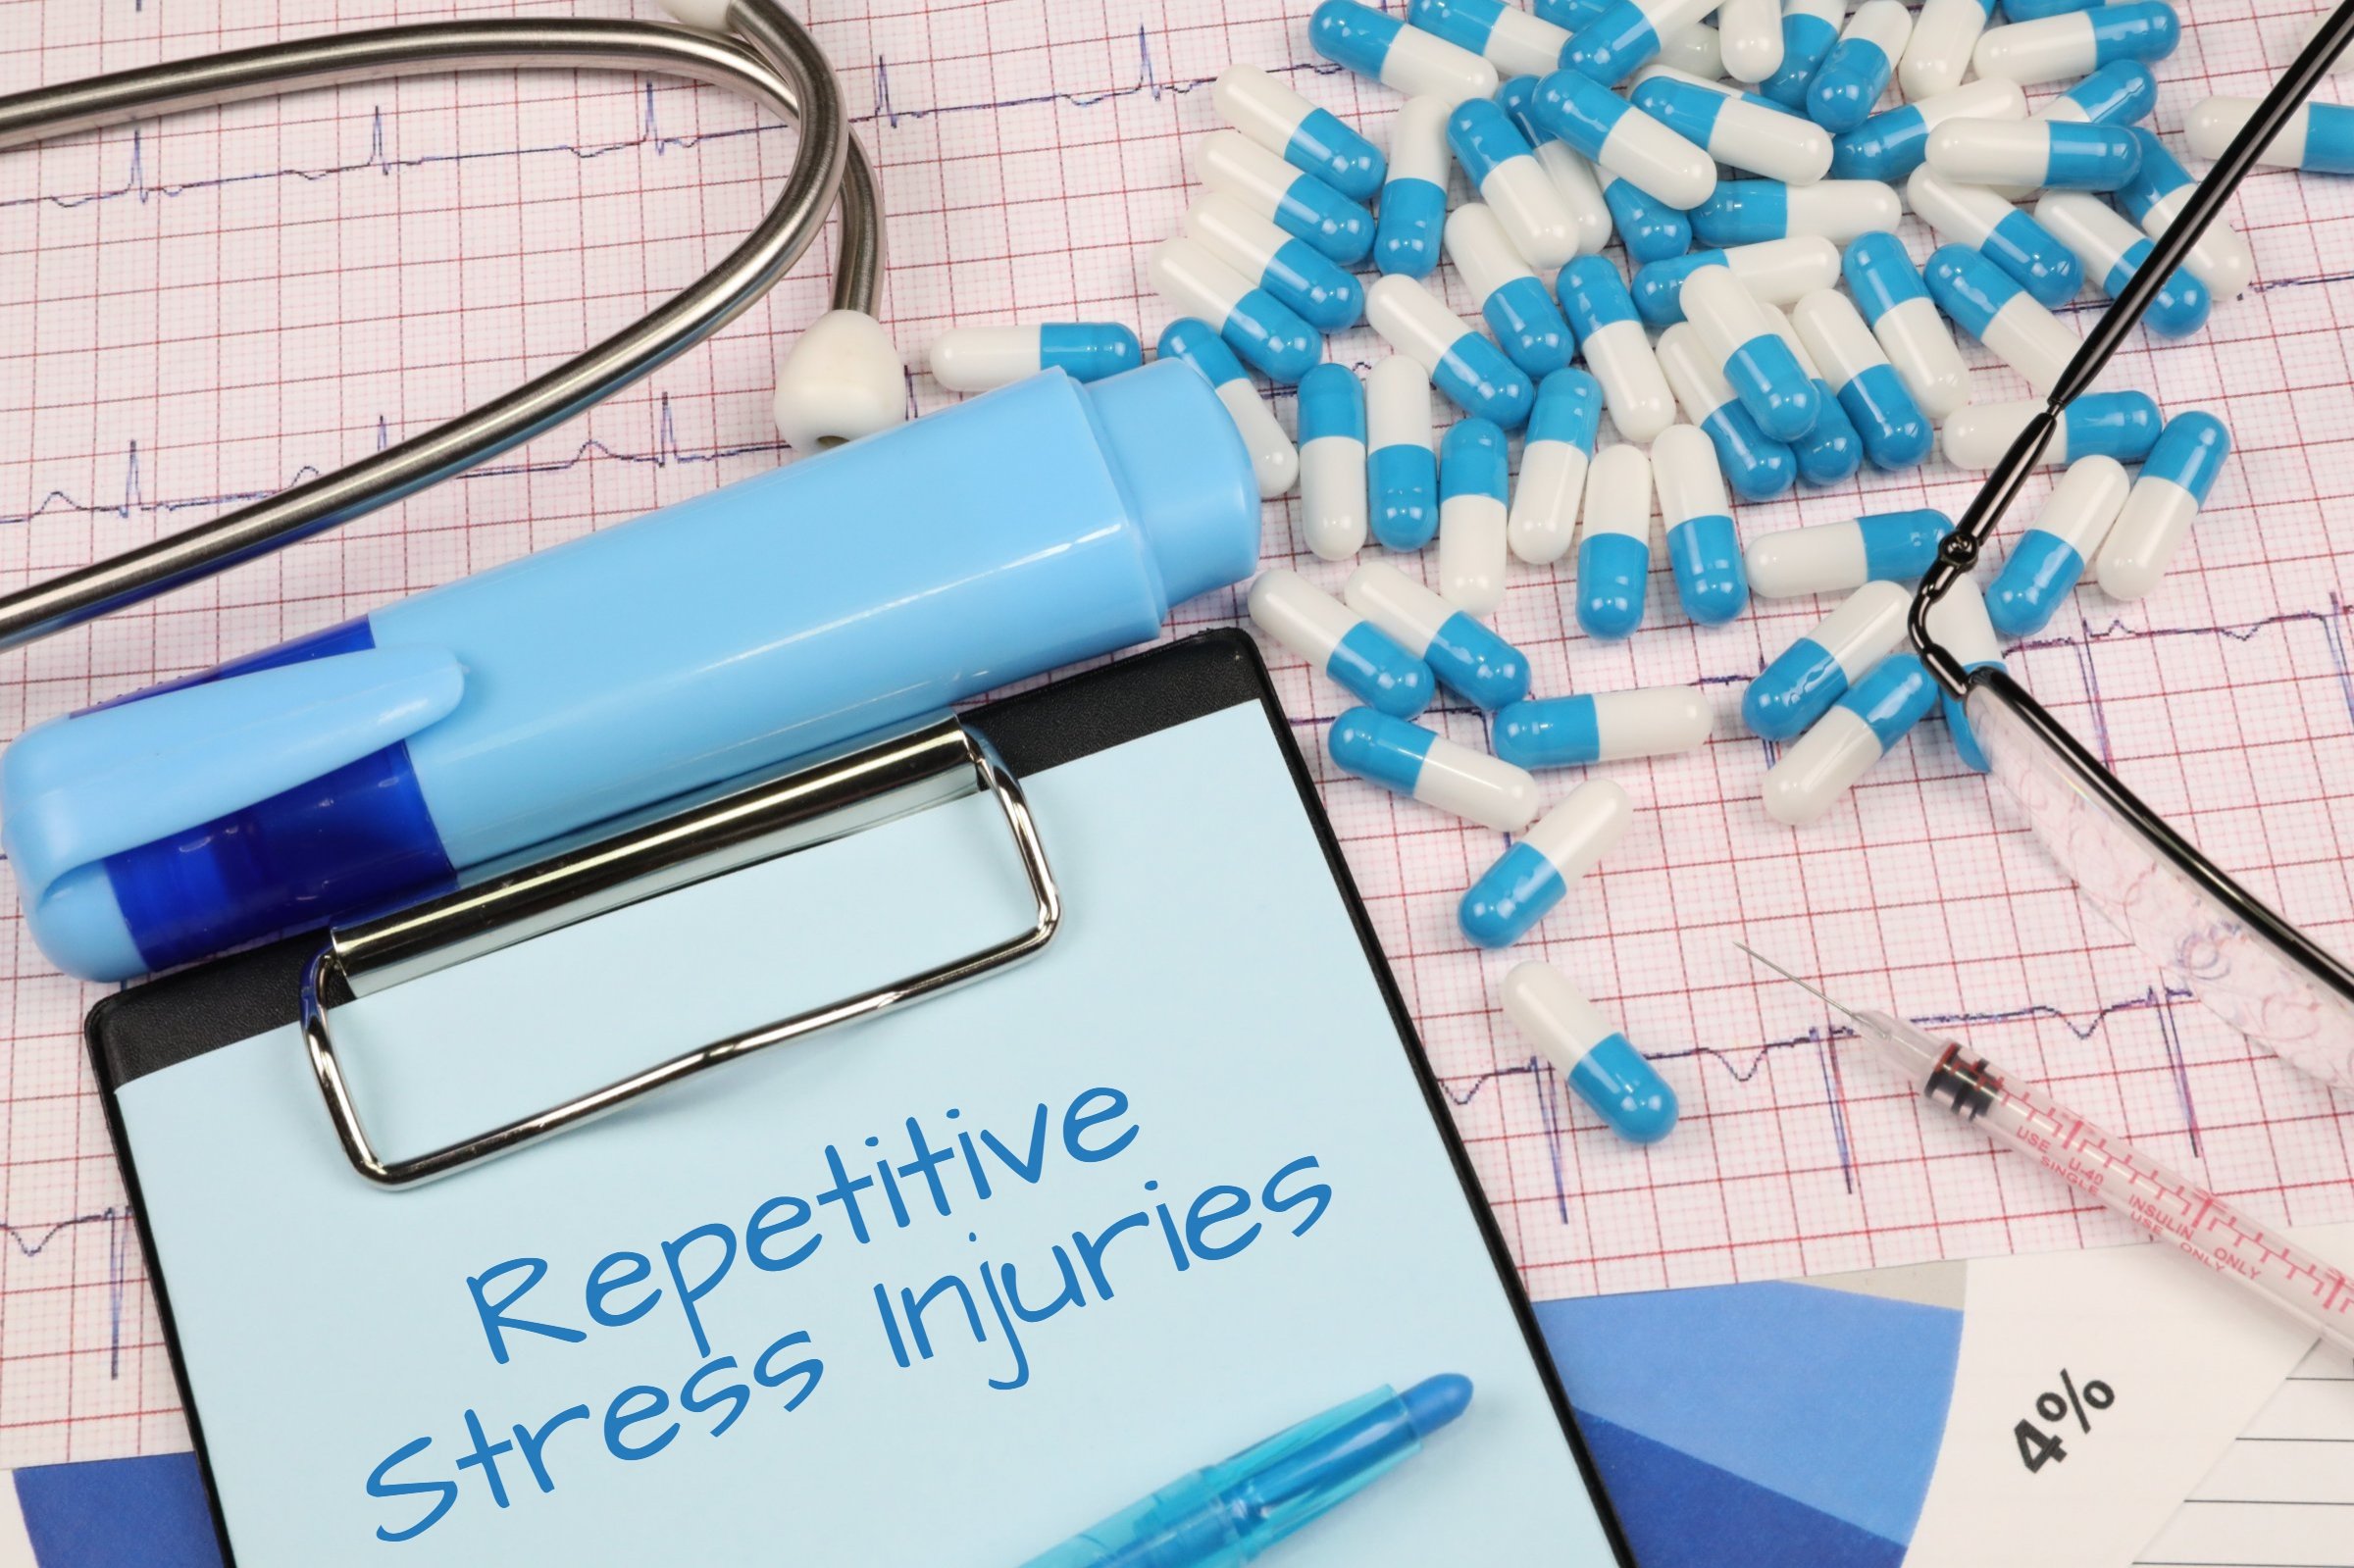 repetitive stress injuries